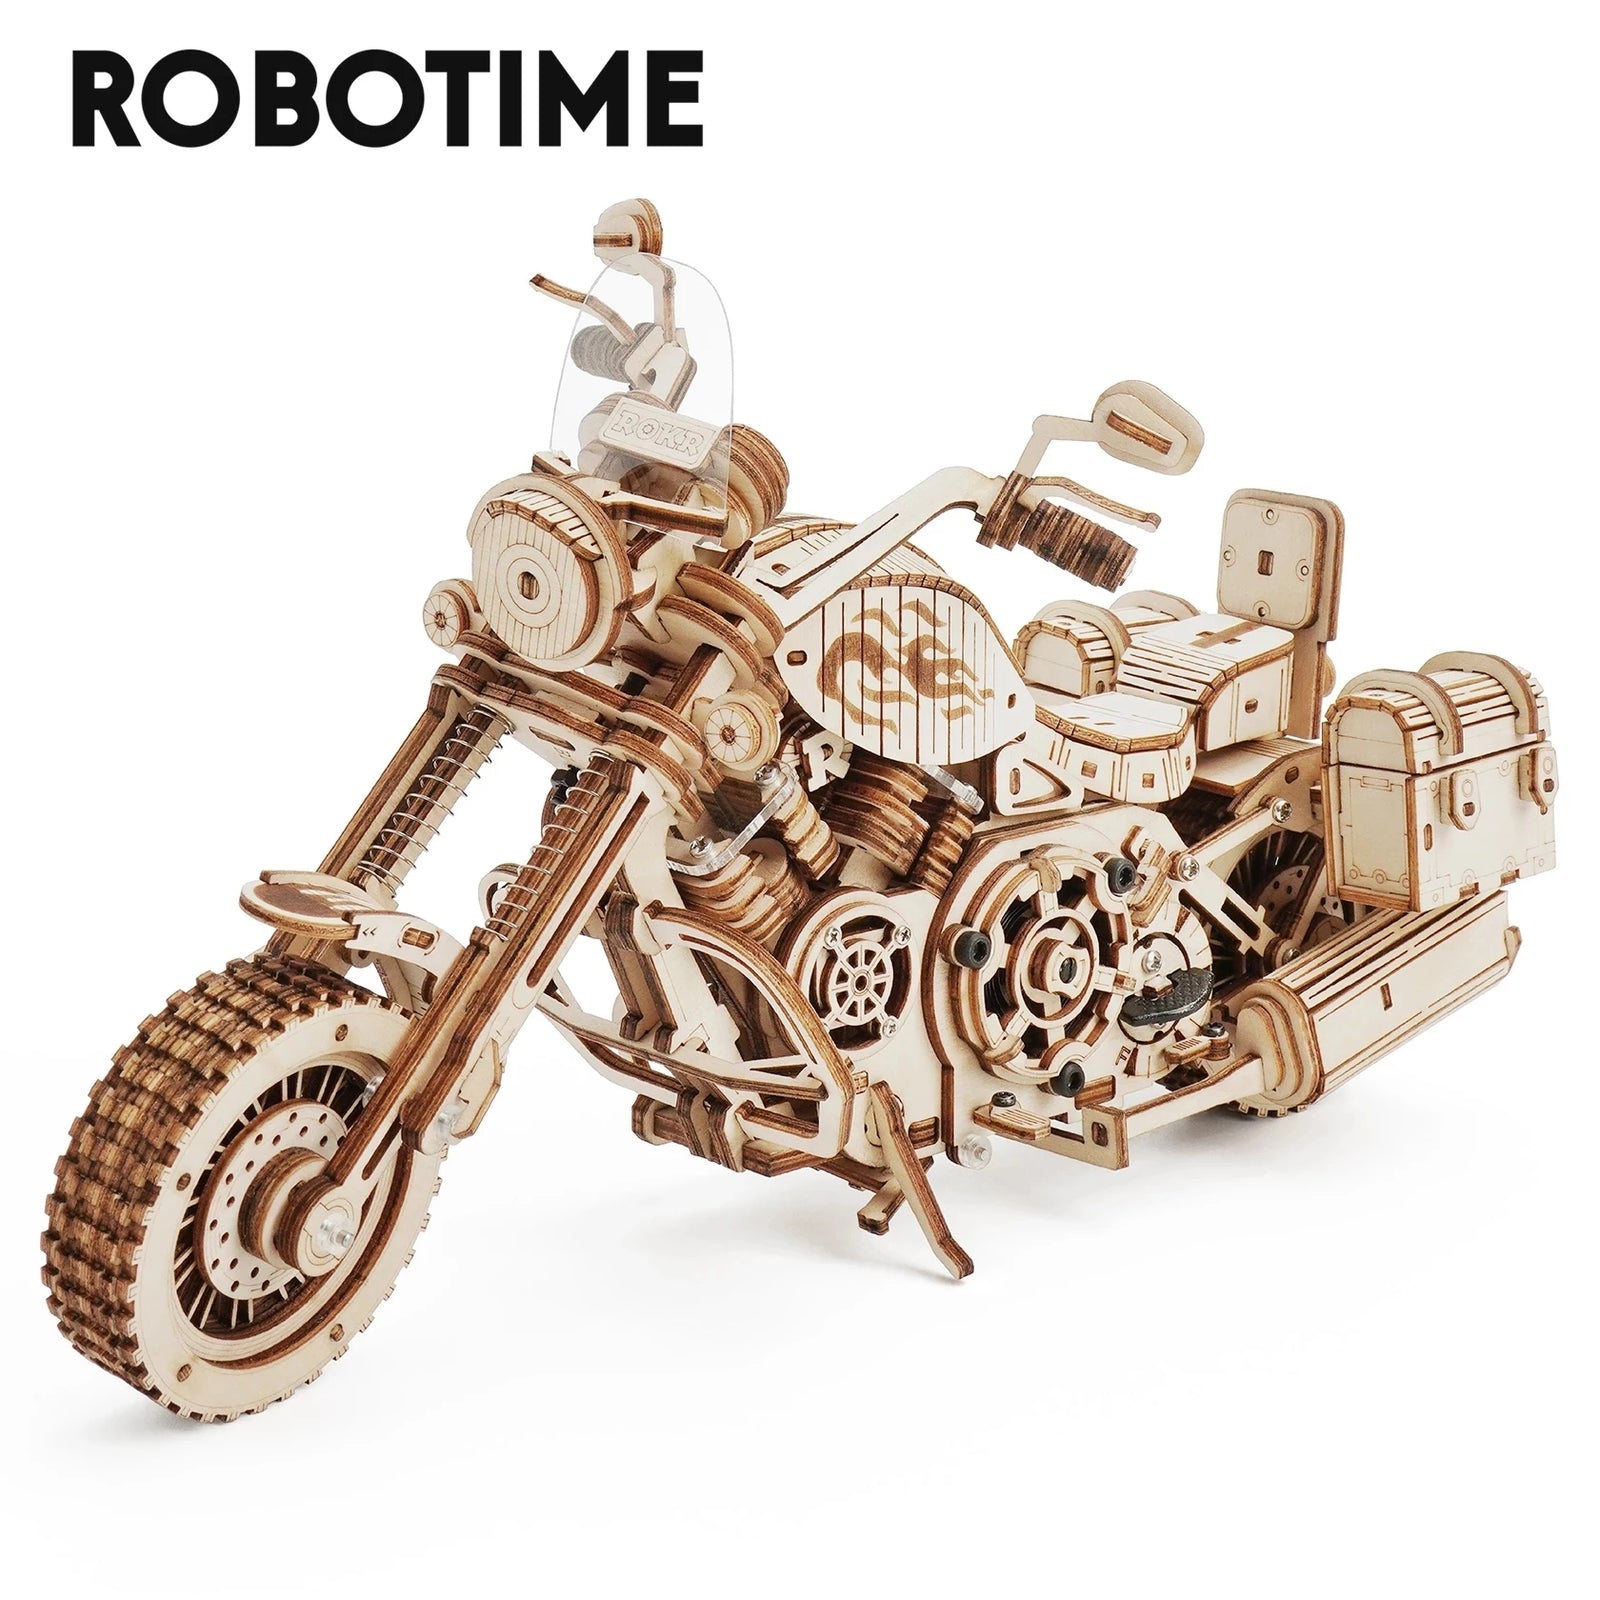 Robotime Rokr Cruiser Motorcycle DIY Wooden Model 420 Pcs Building Block Kits Funny Toys Gifts For Children - TryKid